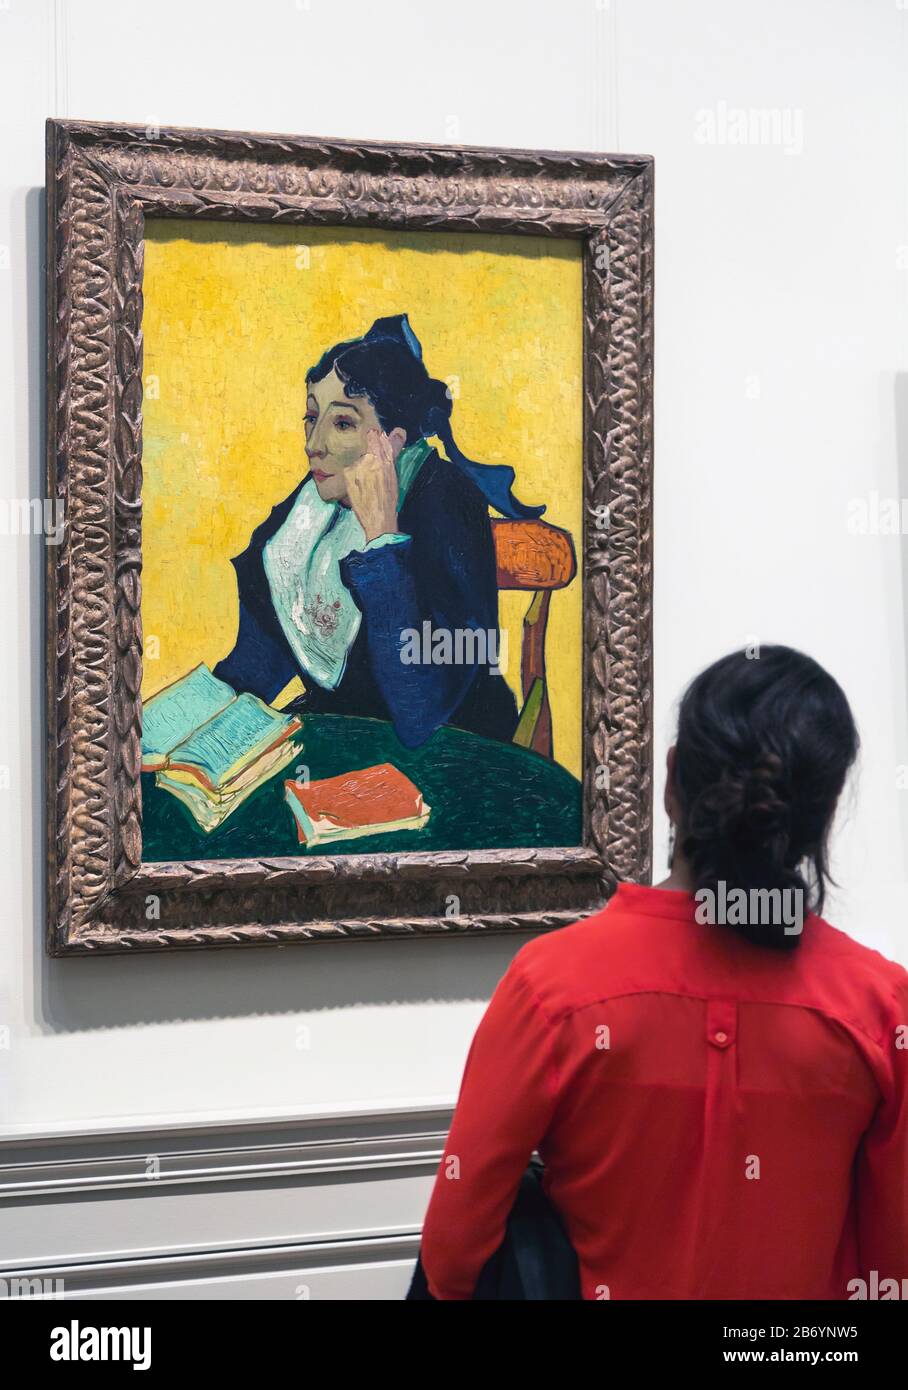 Visitor admiring L'Arlésienne: Madame Joseph-Michel Ginoux, by Vincent van Gogh on display in the Metropolitan Museum of Art, New York City, New York Stock Photo